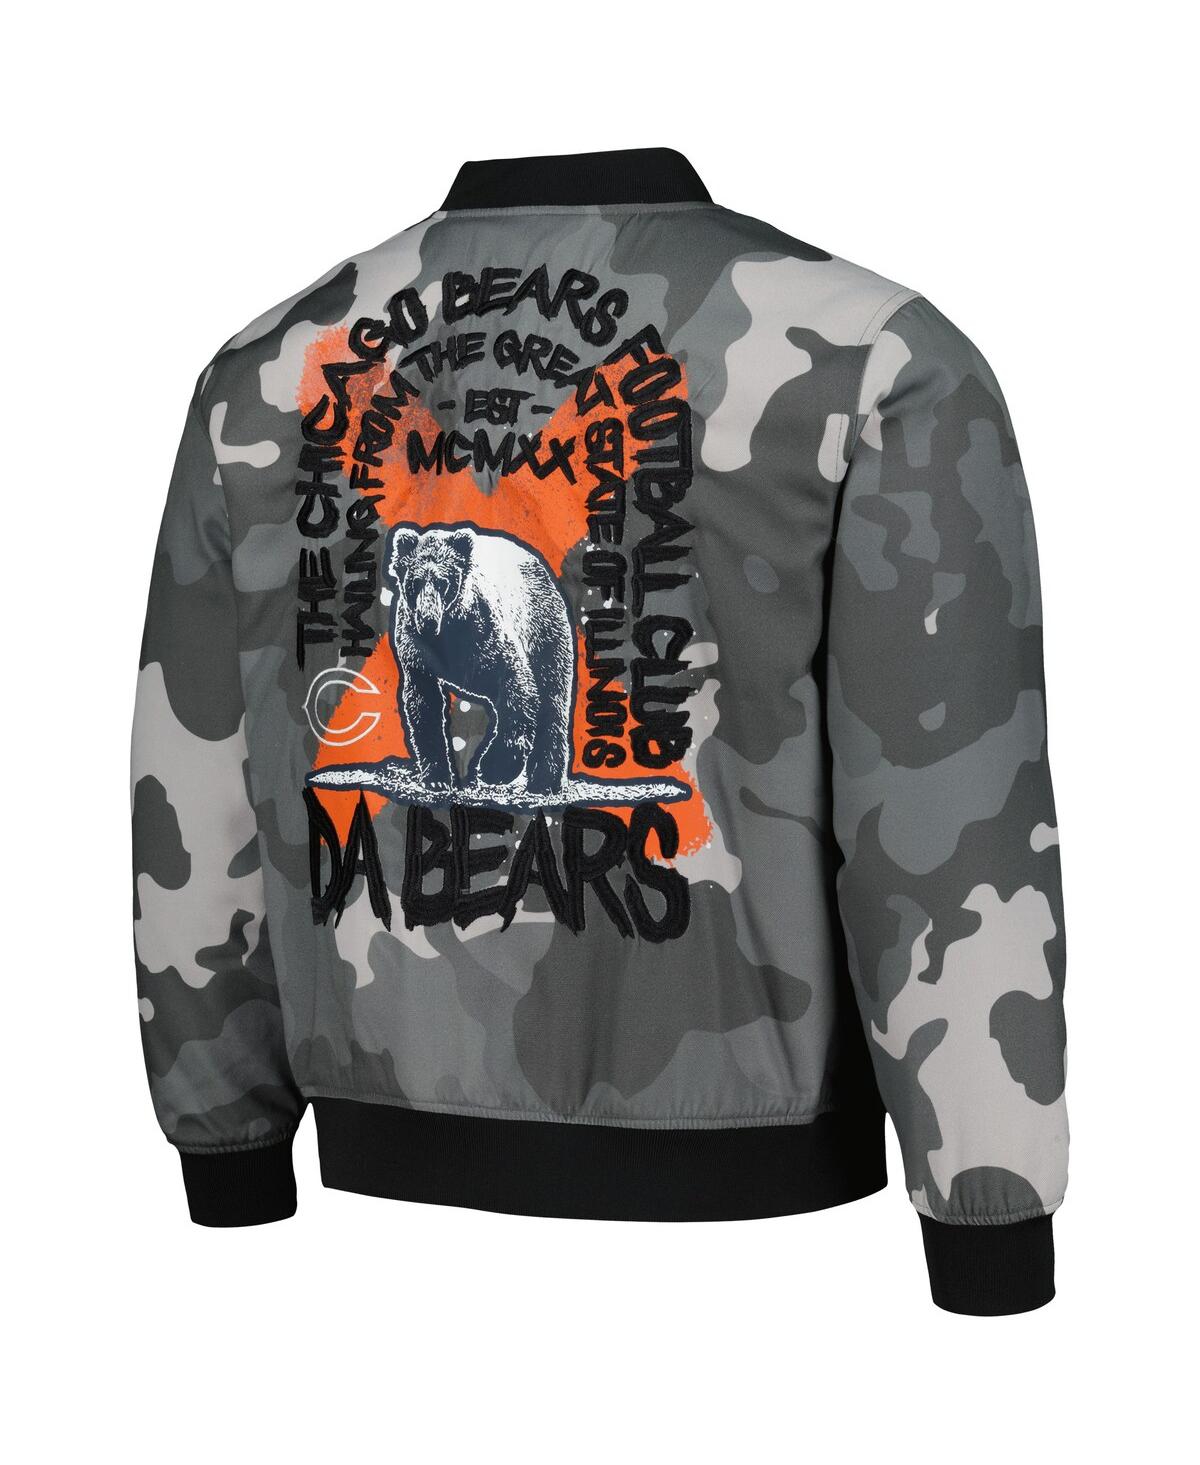 Shop The Wild Collective Men's And Women's  Gray Distressed Chicago Bears Camo Bomber Jacket